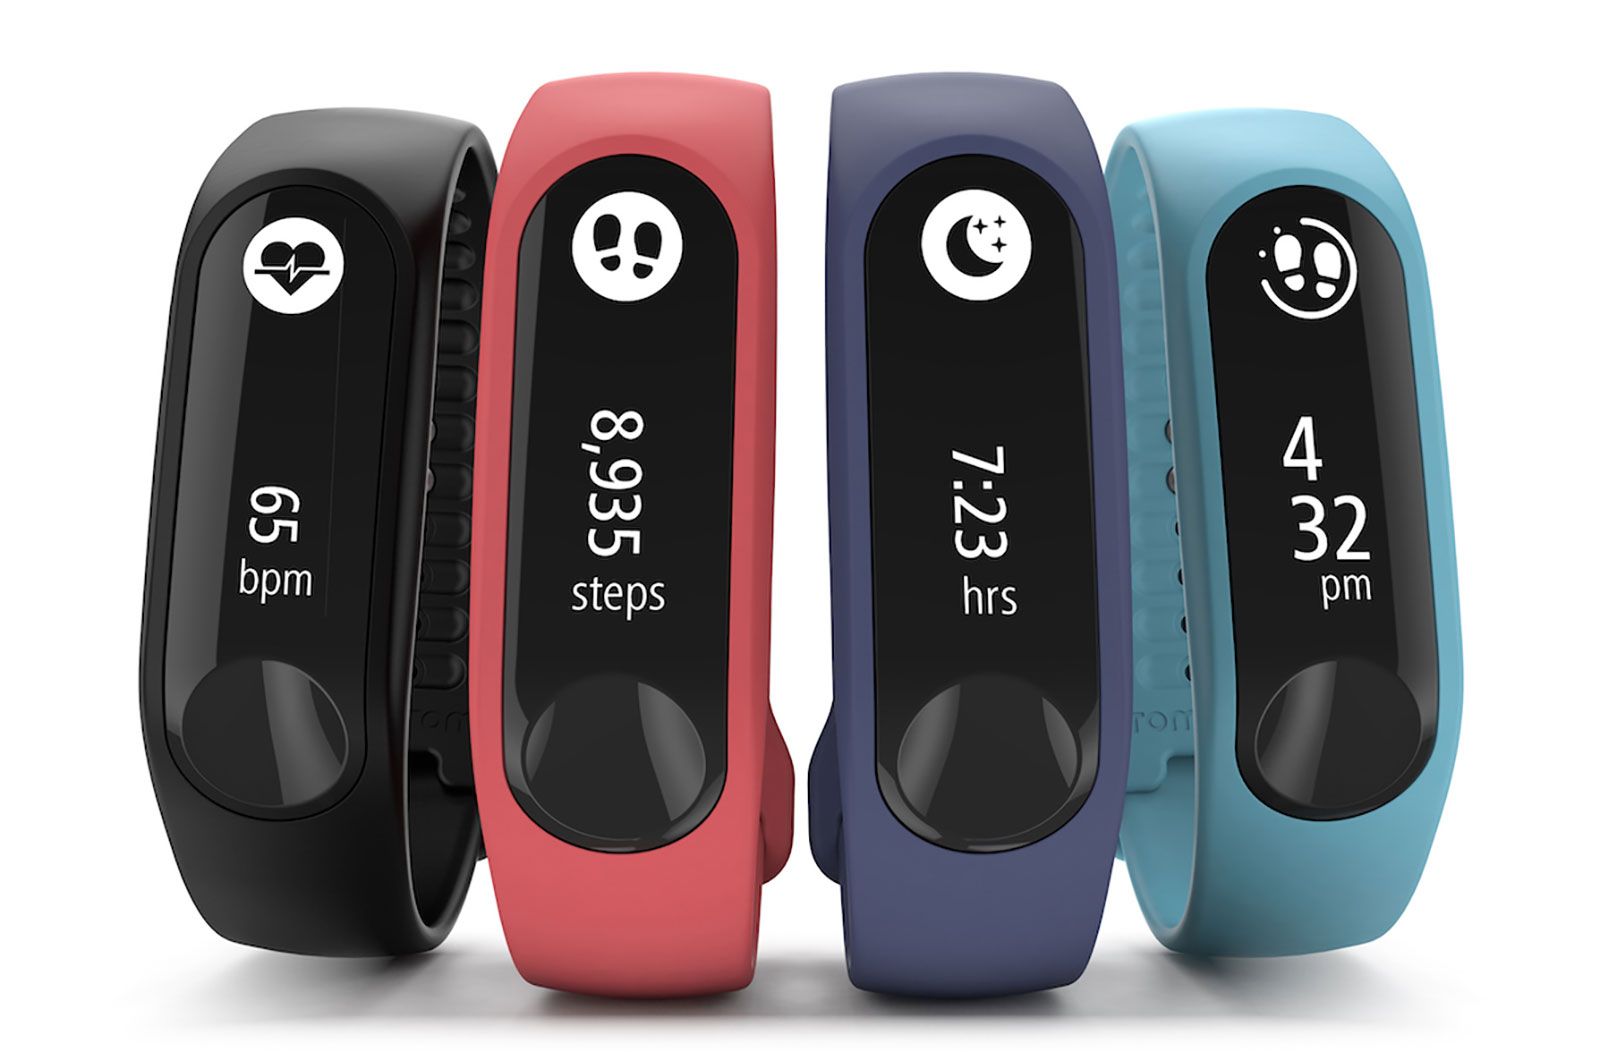 tomtom touch cardio is an entry level fitness tracker that covers the basics image 1